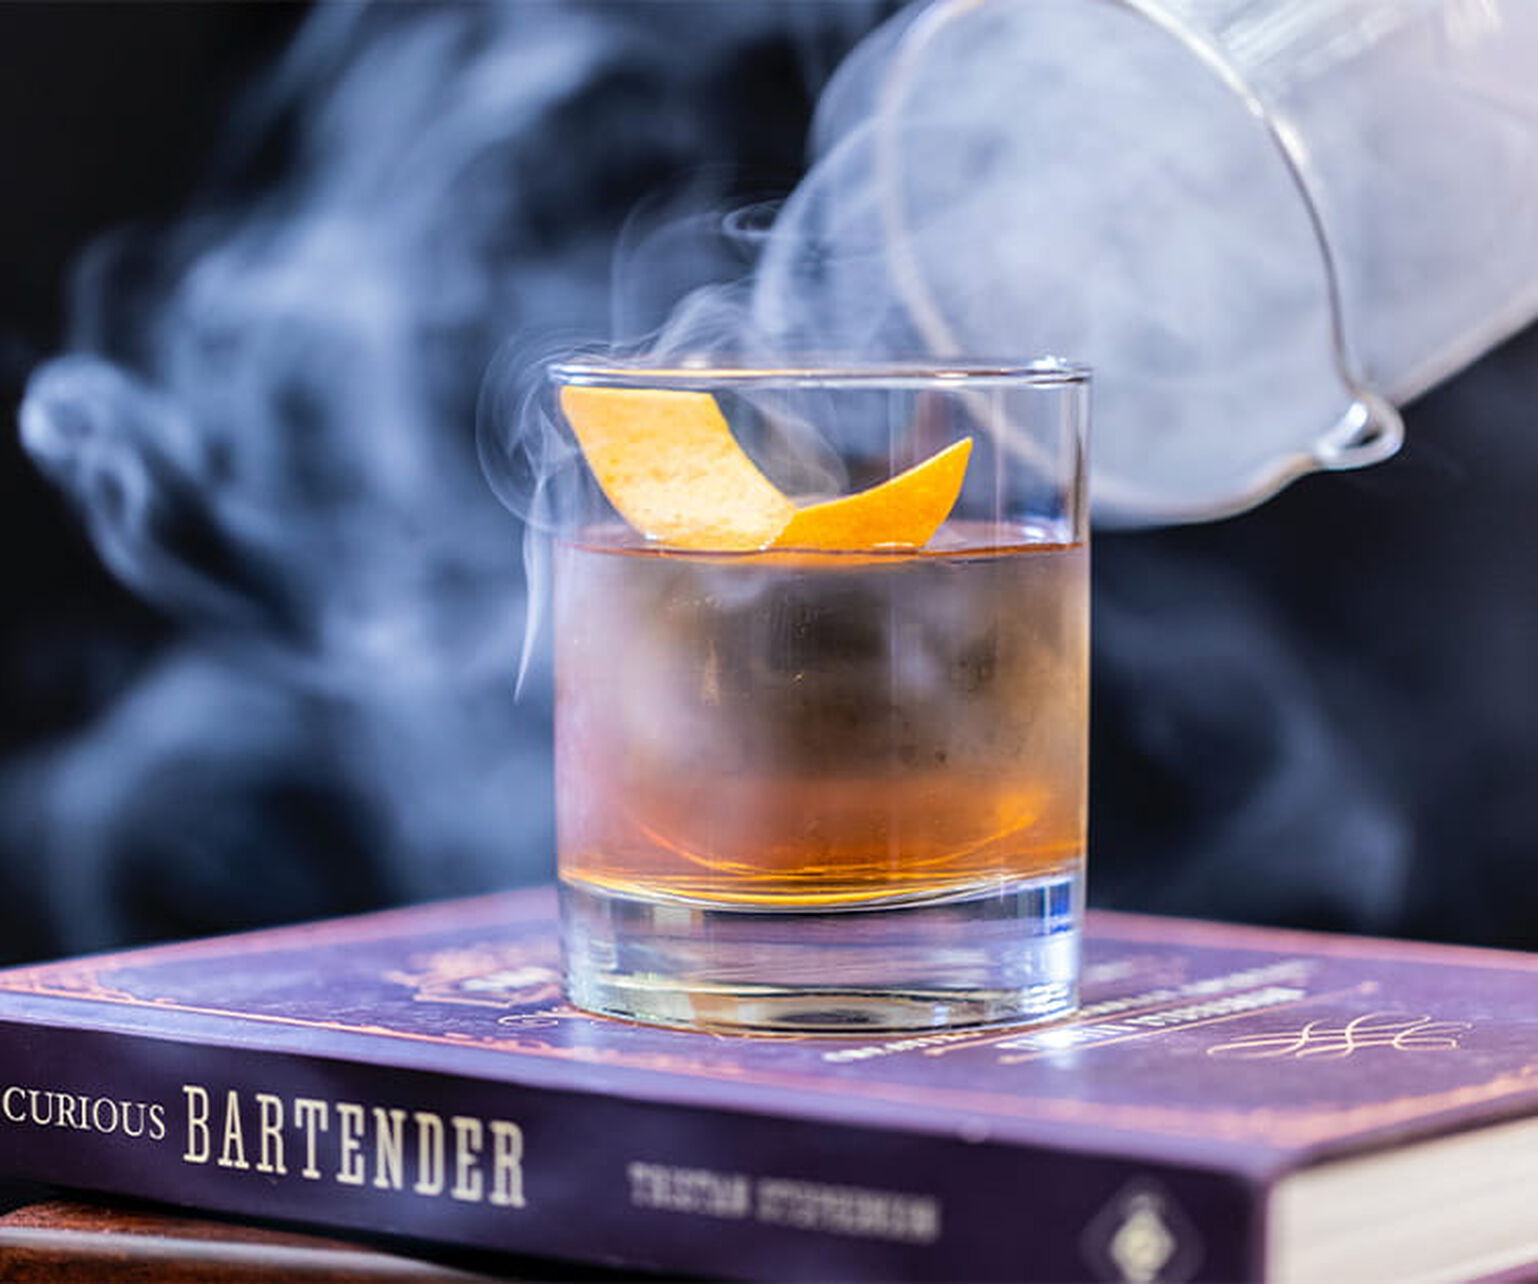 A smoking cloche is taken off an old fashioned cocktail, filling the air with aromatic smoke